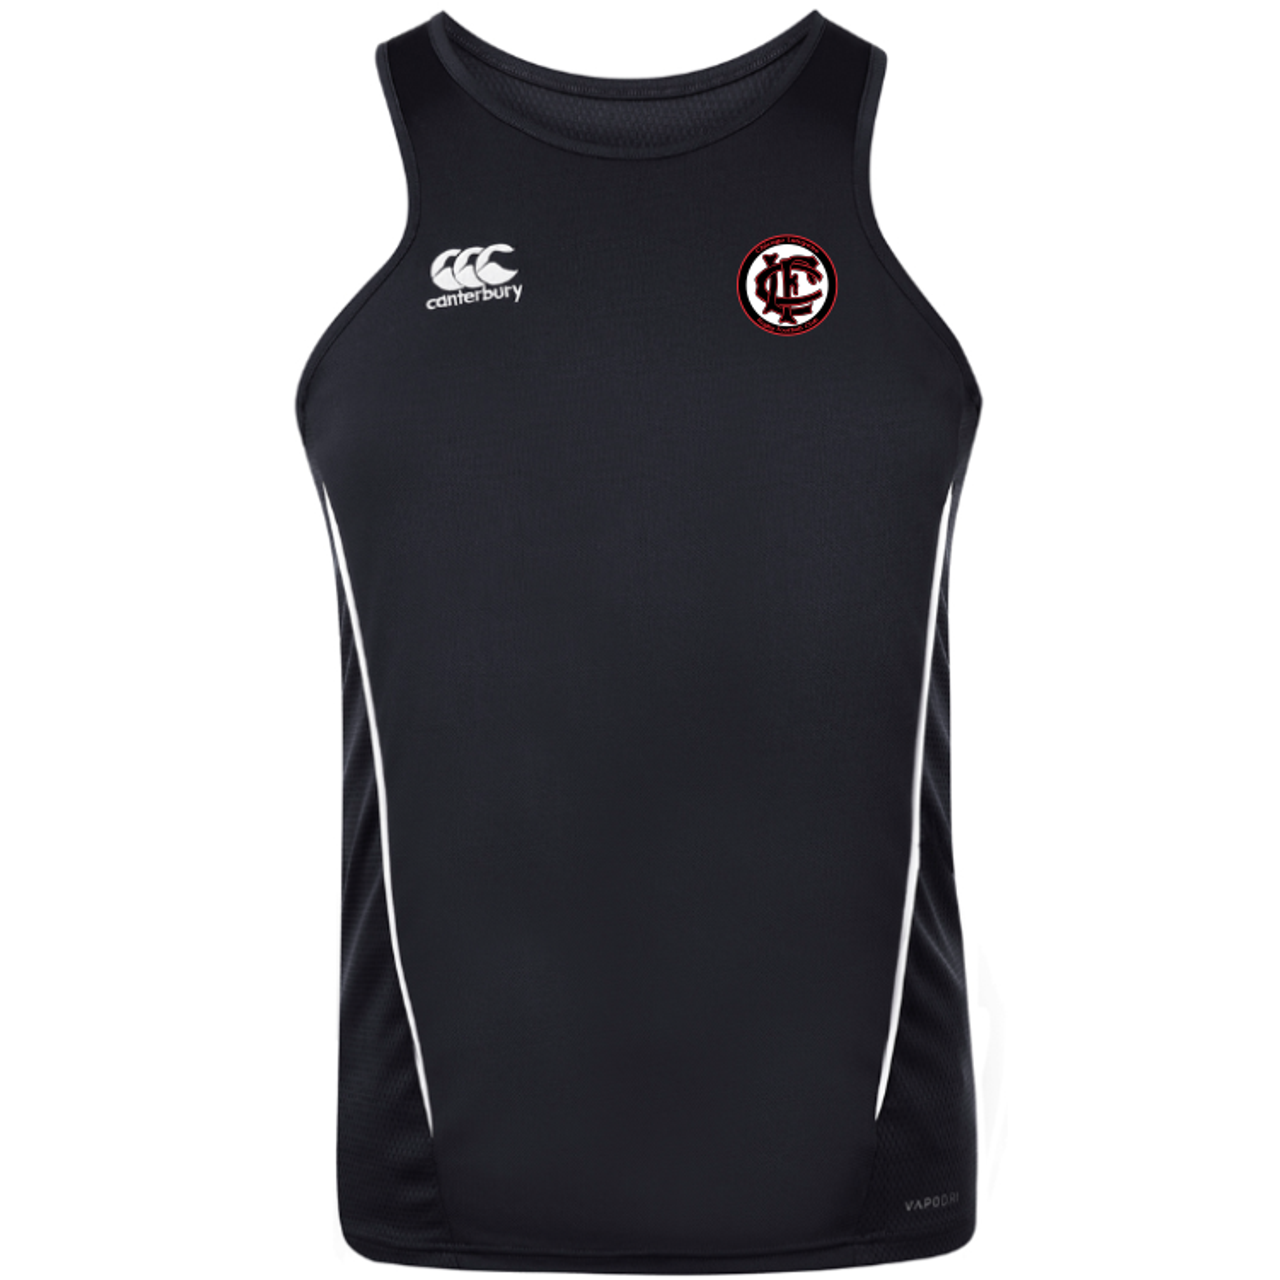 Chicago Lawyers CCC Team Dry Singlet